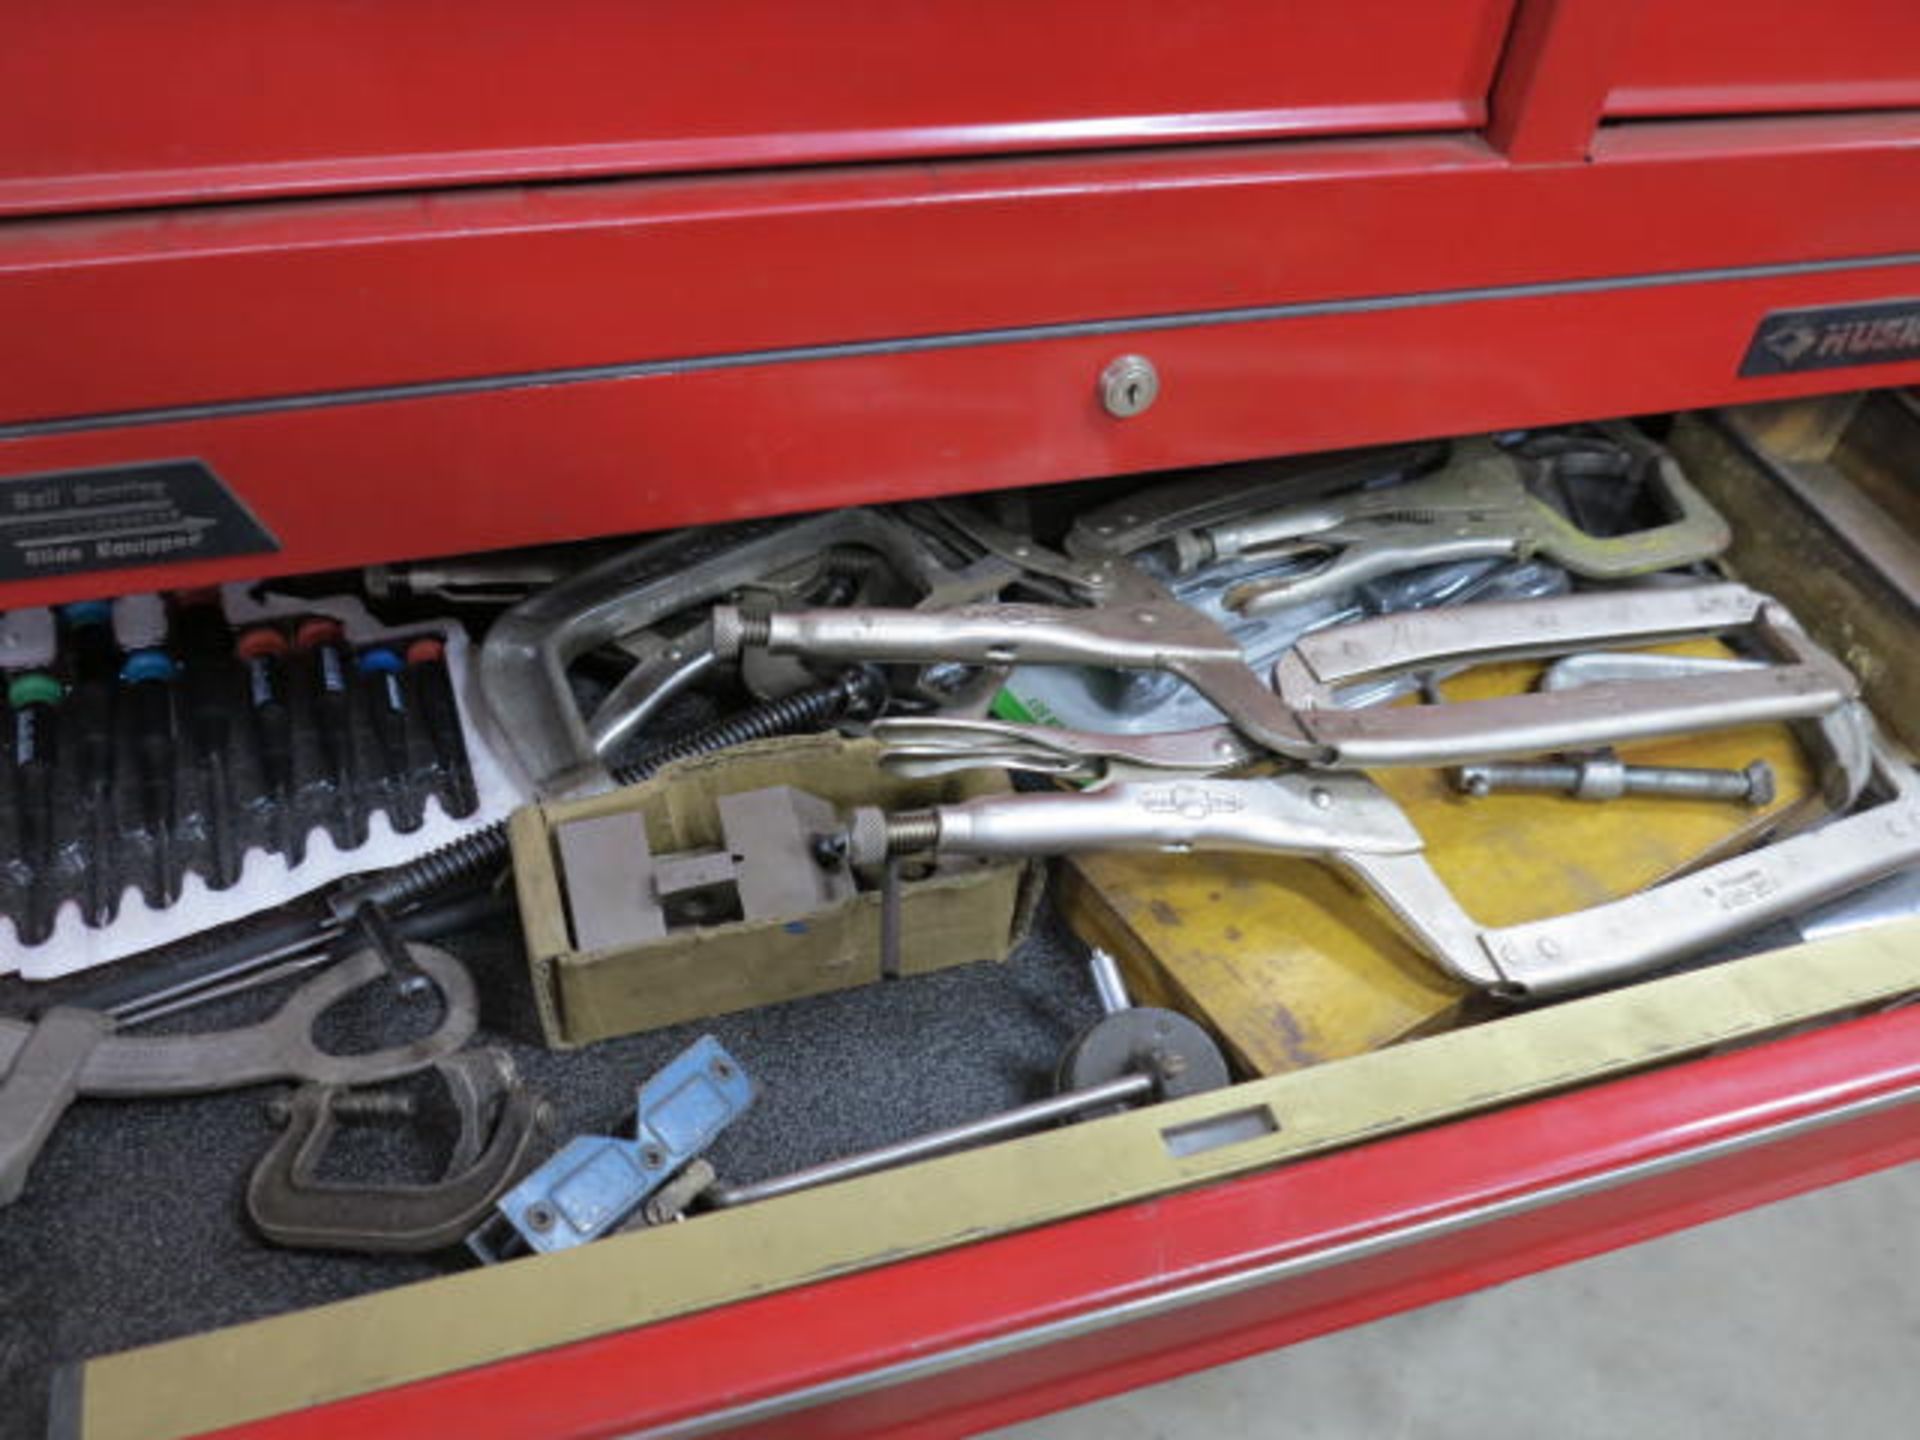 Mechanics Tool Chest Loaded with Tools Located at 93 Macondrey St Cumberland, RI - Image 3 of 6